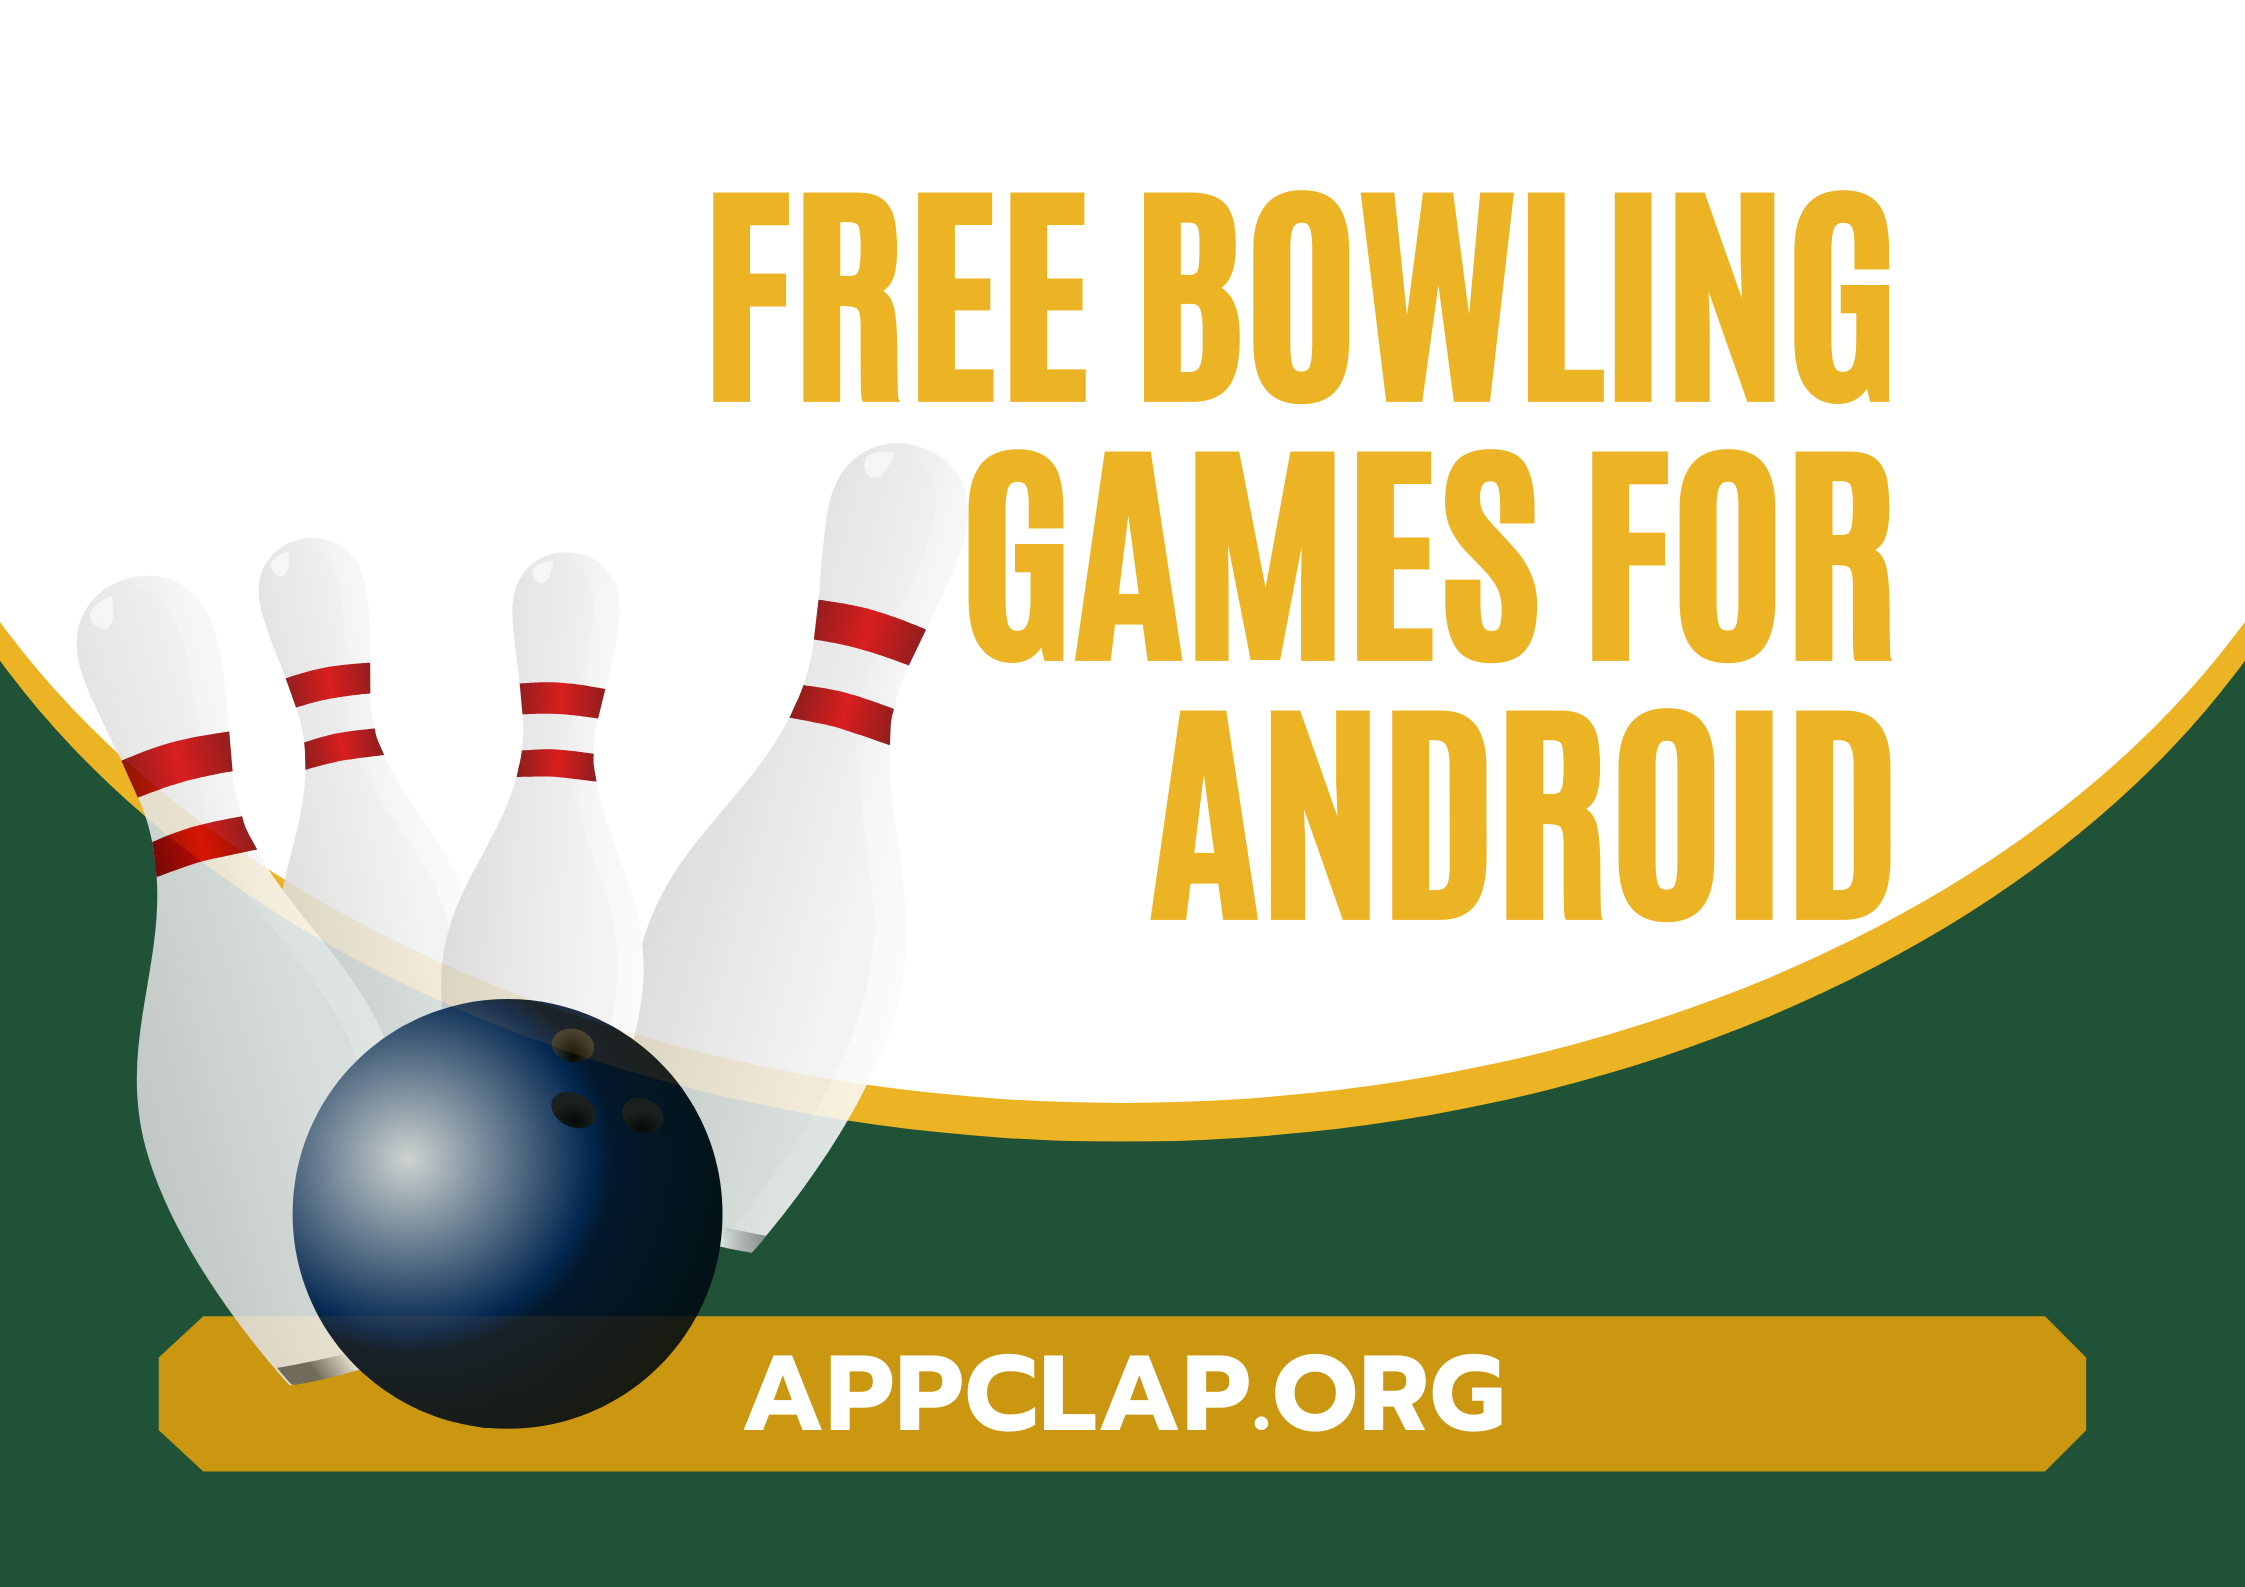 Free Bowling Games for Android